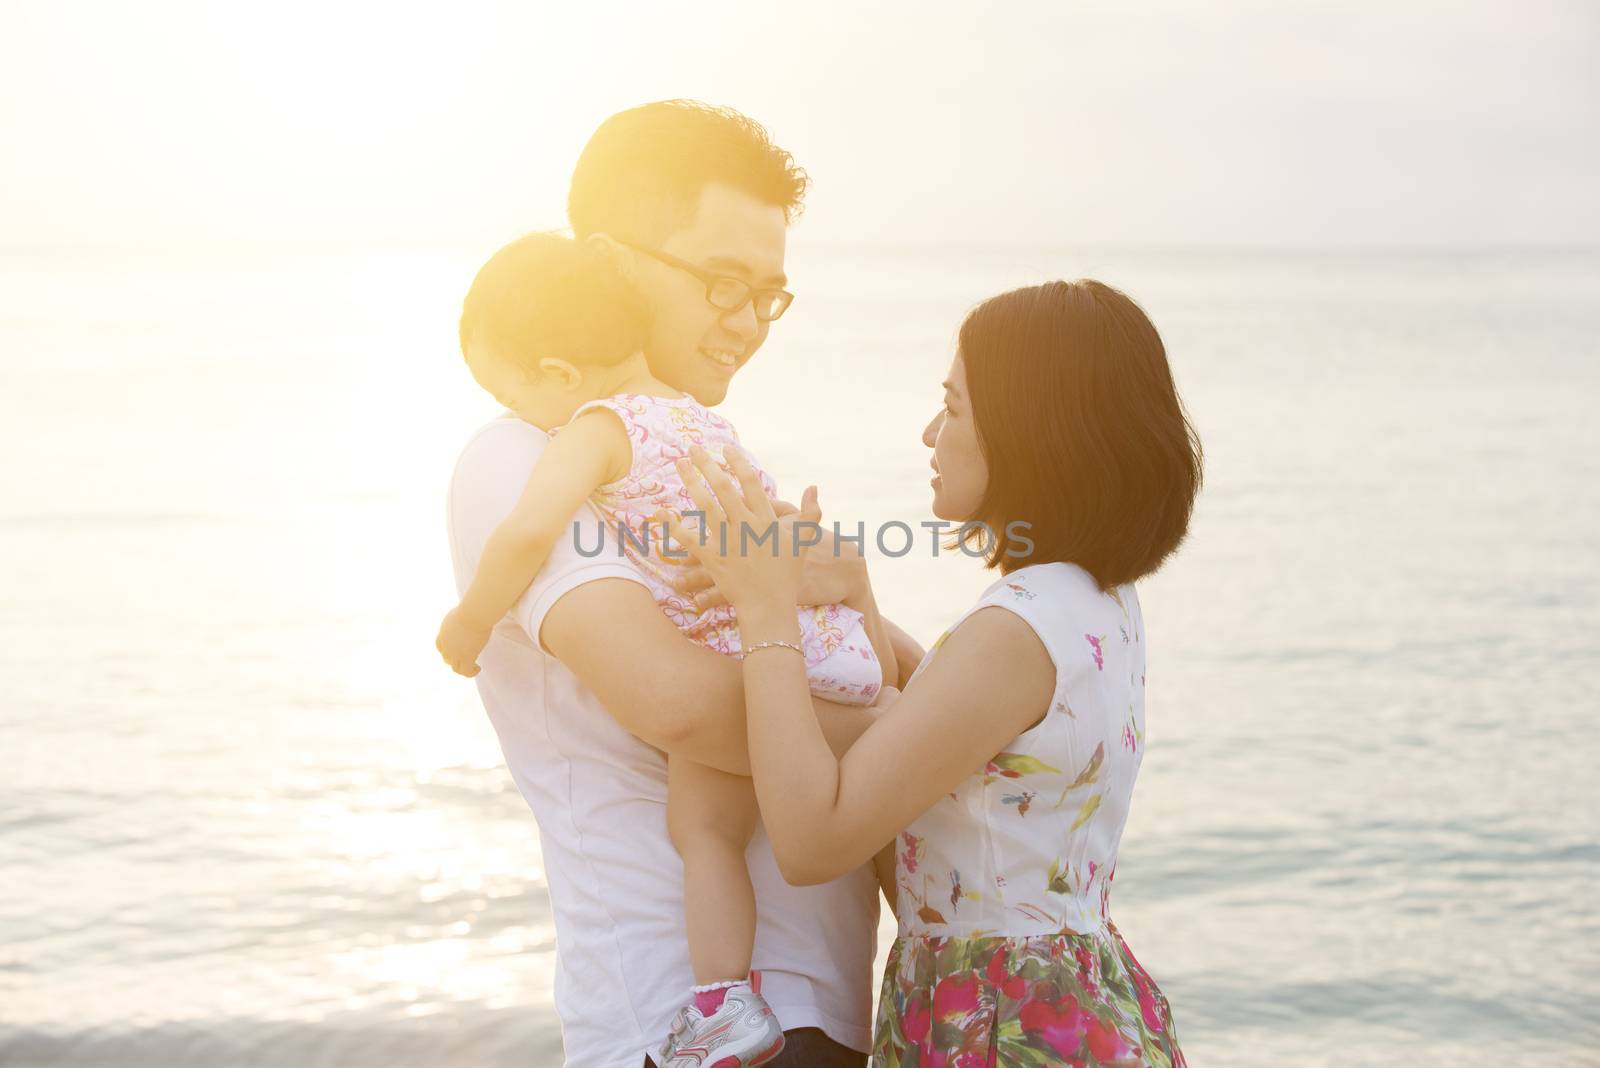 Asian family outdoor portrait, enjoying holiday together on coastline in beautiful sunset during vacations.